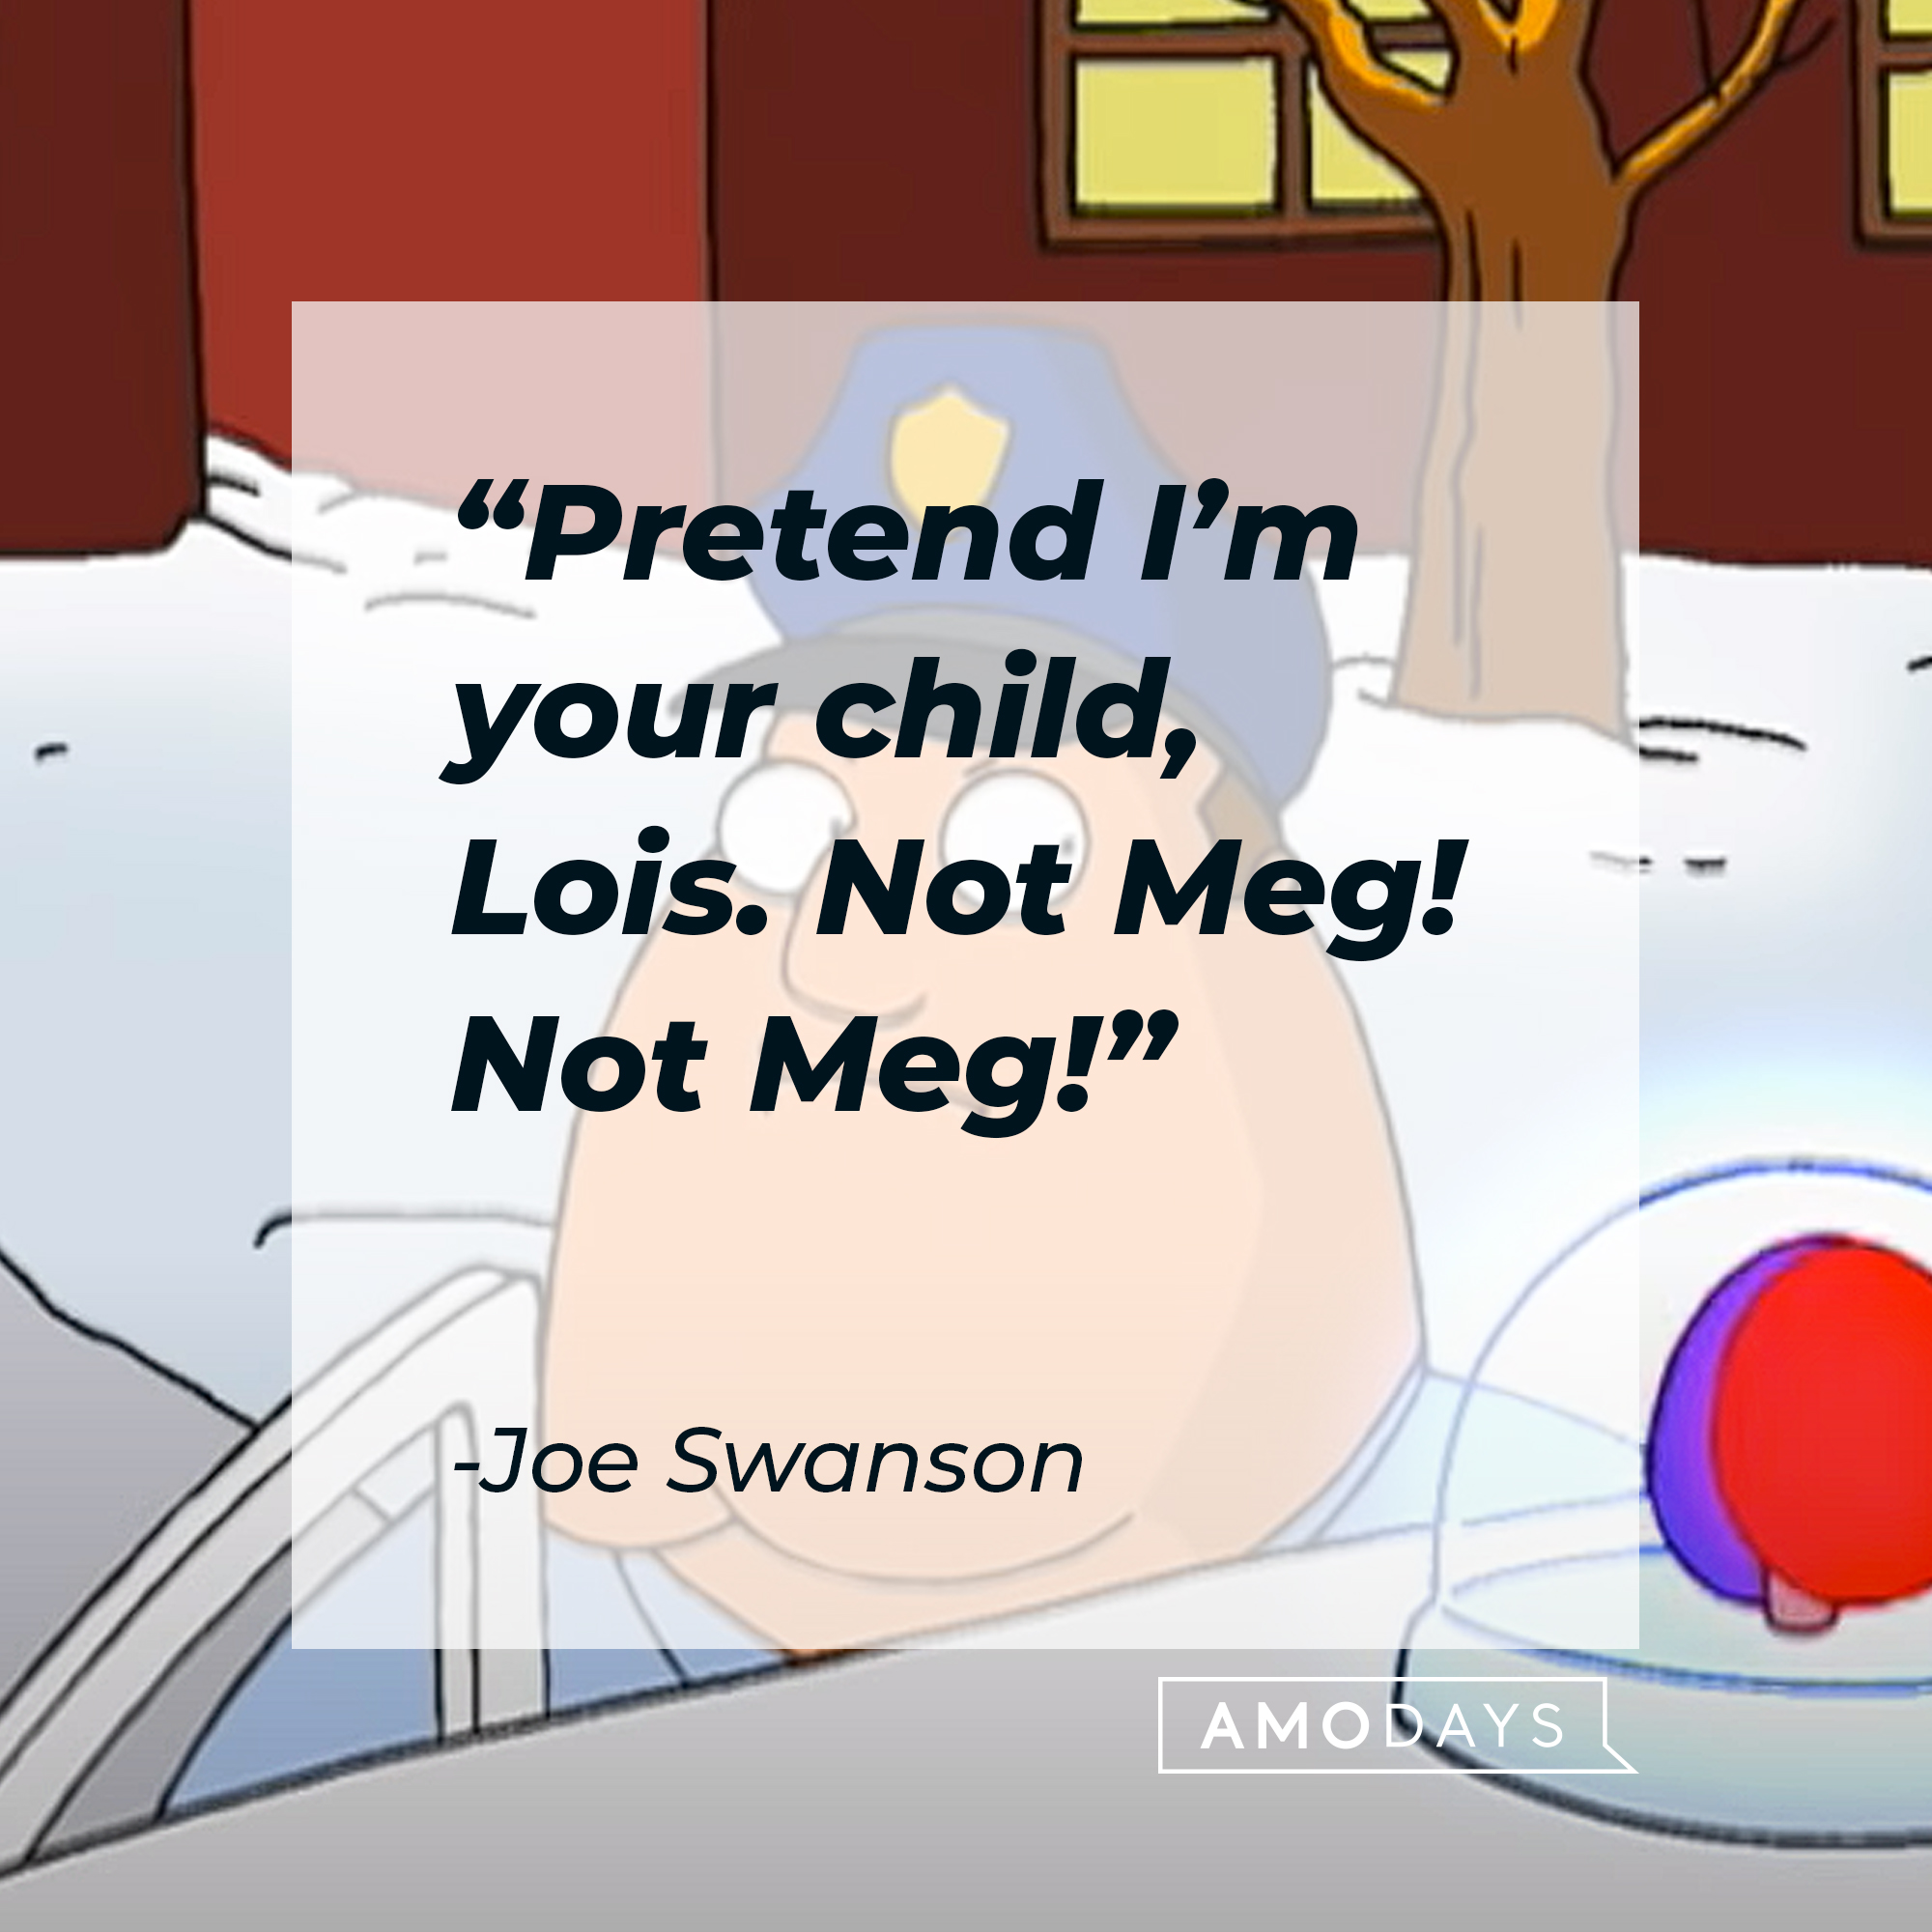 Joe Swanson from "Family Guy" with his quote: “Pretend I’m your child, Lois. Not Meg! Not Meg!” | Source: YouTube.com/TBS